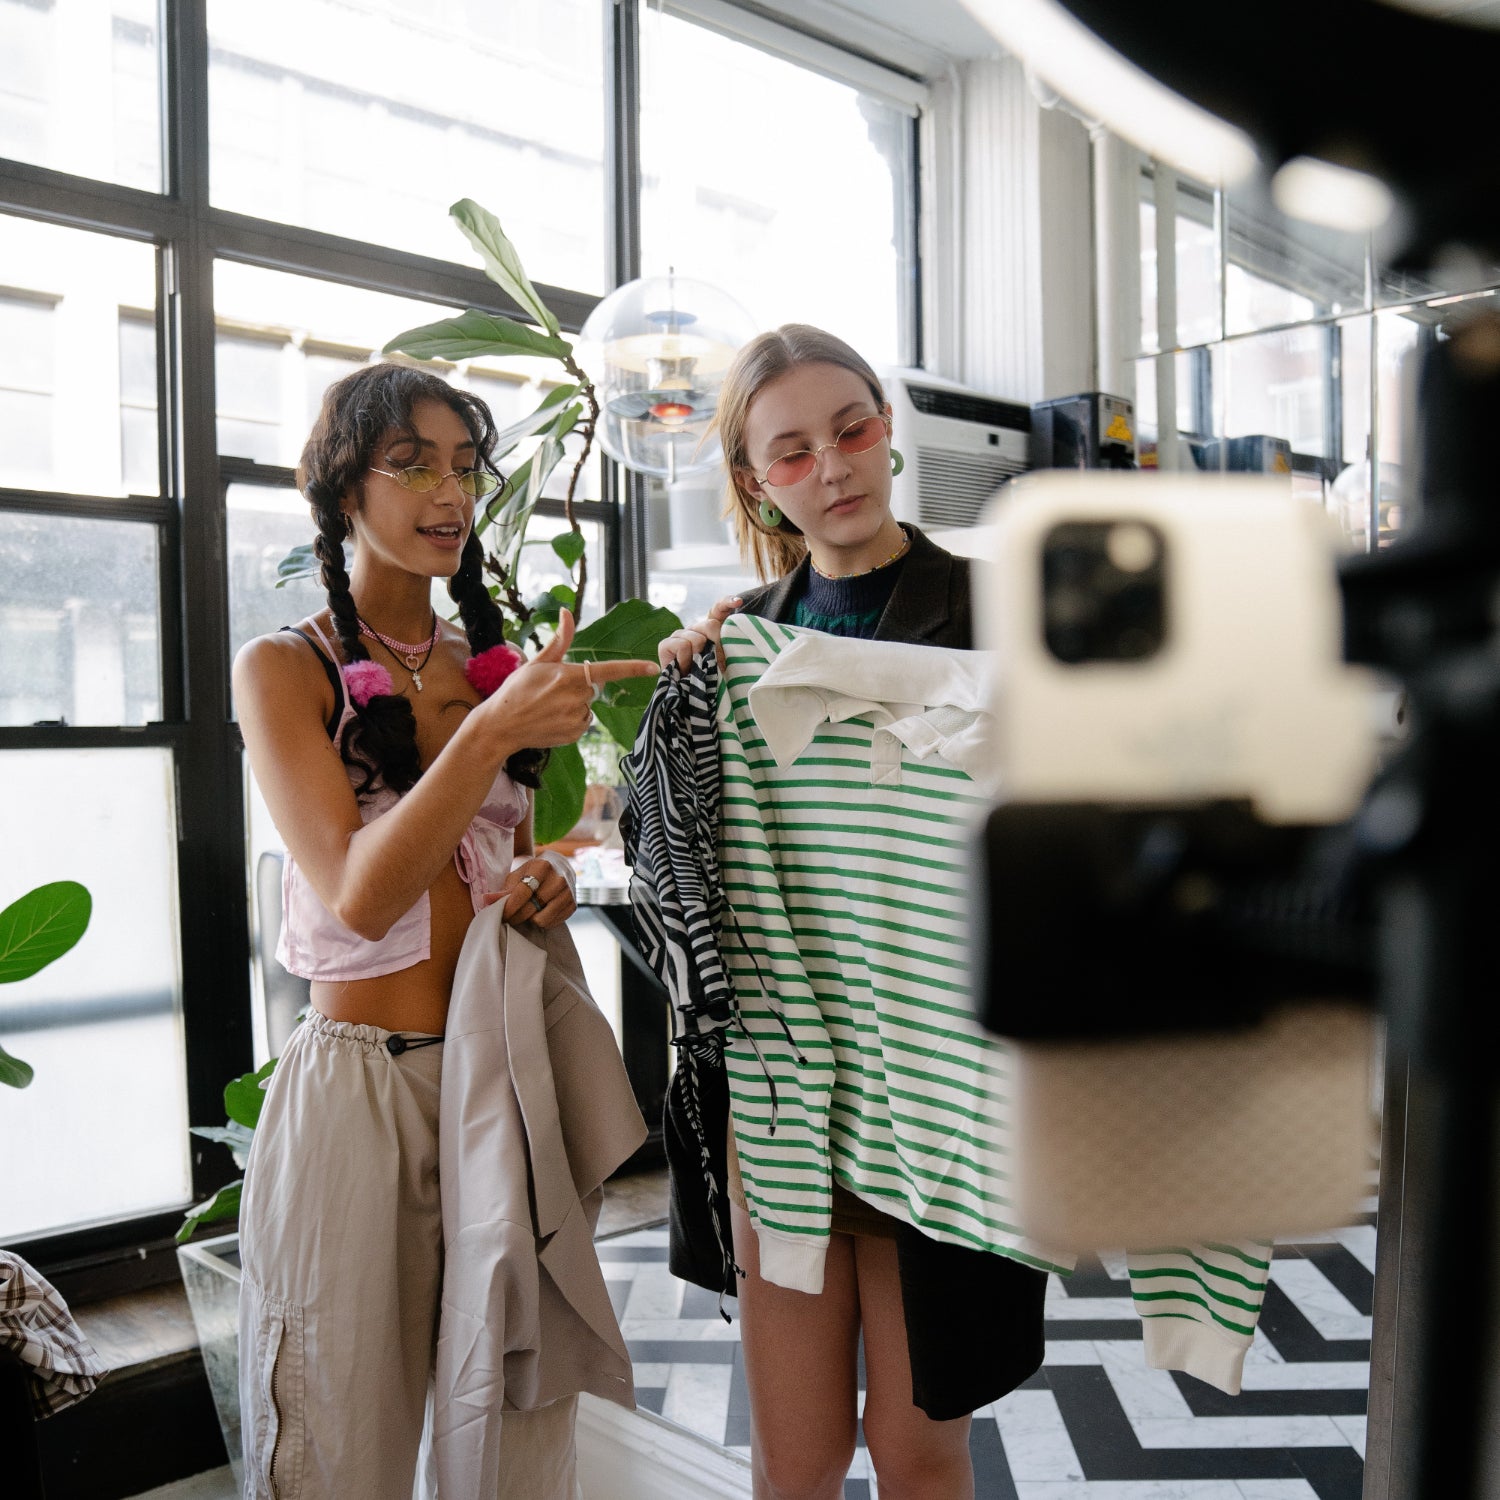 Two young people record a fashion video